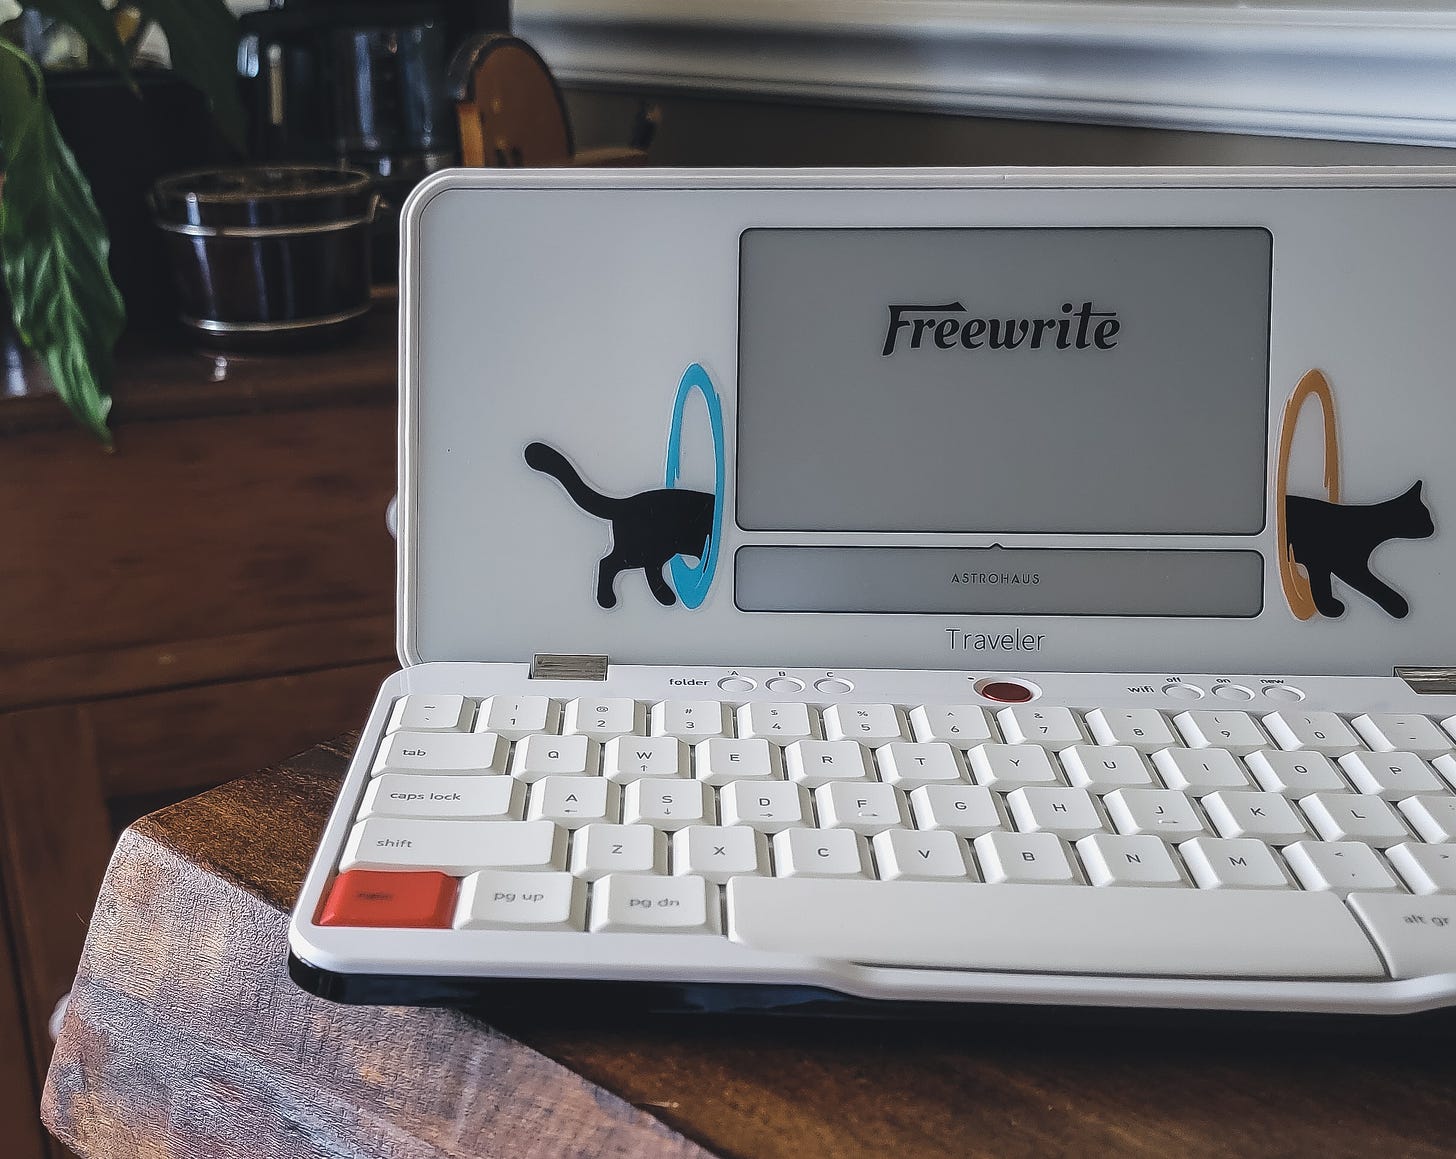 My Freewrite Traveler device sitting on a table. There are portal cat stickers on either side of the screen.